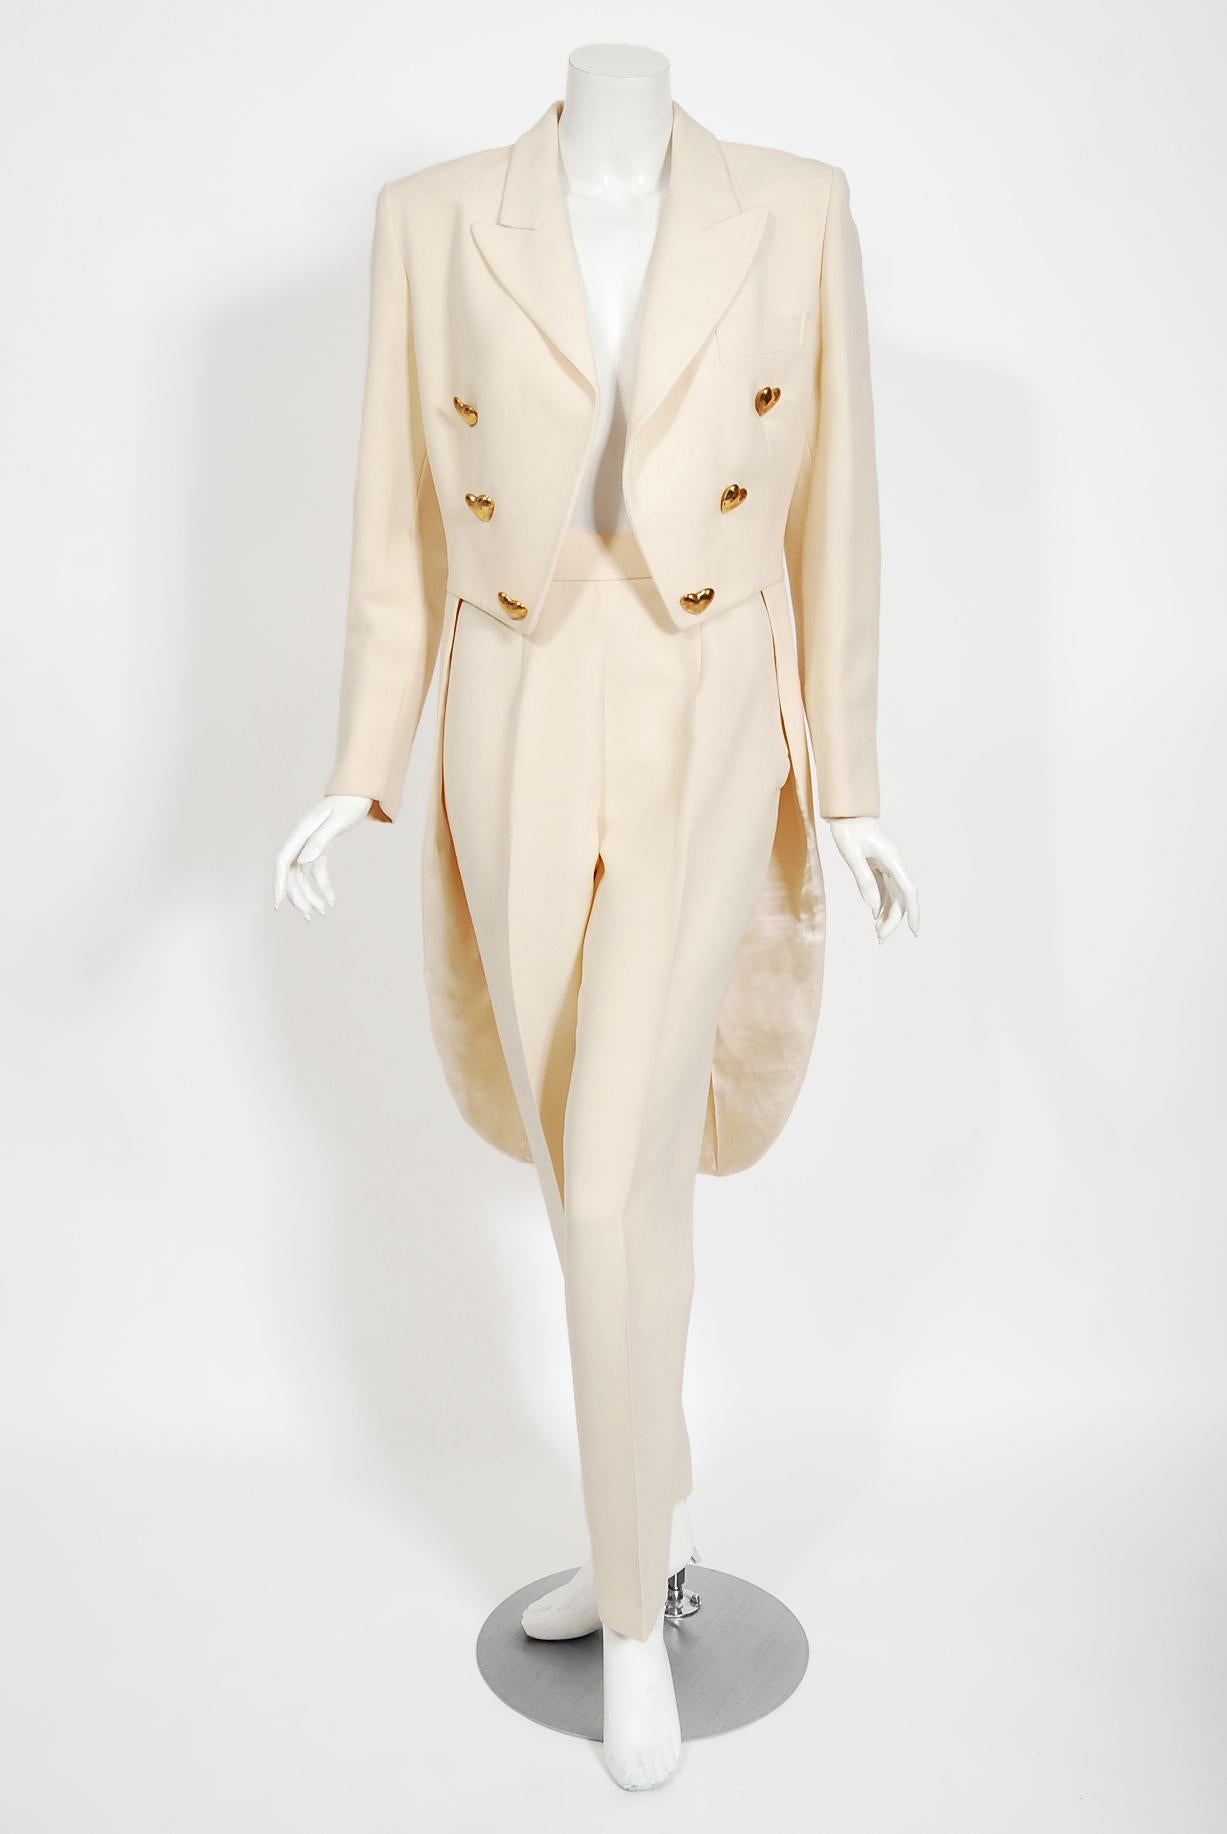 Exquisite Moschino Couture cream wool heart-buttons tuxedo pantsuit dating back to his 1993 fall-winter Hearts Collection. Moschino called himself half tailor, half artist; although he did not cut or sew, he drew frequently, quickly, and